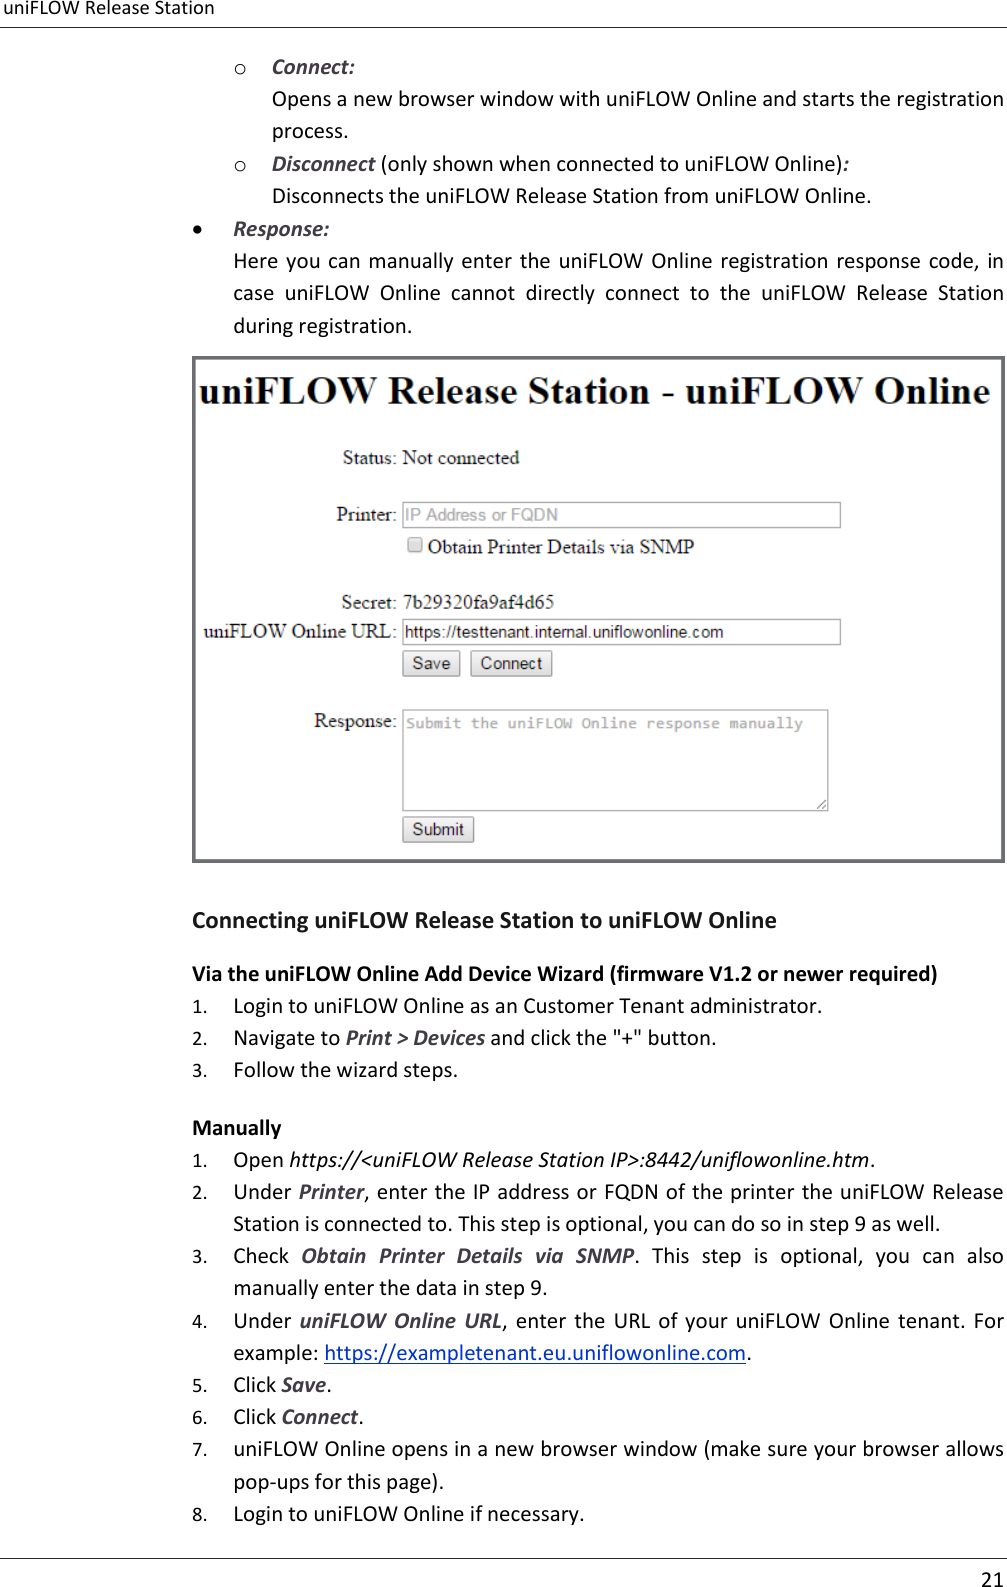 uniFLOW Release Station     21  o Connect: Opens a new browser window with uniFLOW Online and starts the registration process. o Disconnect (only shown when connected to uniFLOW Online): Disconnects the uniFLOW Release Station from uniFLOW Online.  Response: Here you can manually enter  the uniFLOW Online registration response code, in case  uniFLOW  Online  cannot  directly  connect  to  the  uniFLOW  Release  Station during registration.  Connecting uniFLOW Release Station to uniFLOW Online Via the uniFLOW Online Add Device Wizard (firmware V1.2 or newer required) 1. Login to uniFLOW Online as an Customer Tenant administrator. 2. Navigate to Print &gt; Devices and click the &quot;+&quot; button. 3. Follow the wizard steps. Manually 1. Open https://&lt;uniFLOW Release Station IP&gt;:8442/uniflowonline.htm. 2. Under Printer, enter the IP address or FQDN of the printer the uniFLOW Release Station is connected to. This step is optional, you can do so in step 9 as well. 3. Check  Obtain  Printer  Details  via  SNMP.  This  step  is  optional,  you  can  also manually enter the data in step 9. 4. Under  uniFLOW  Online  URL,  enter the  URL  of  your  uniFLOW  Online  tenant. For example: https://exampletenant.eu.uniflowonline.com. 5. Click Save. 6. Click Connect. 7. uniFLOW Online opens in a new browser window (make sure your browser allows pop-ups for this page). 8. Login to uniFLOW Online if necessary. 